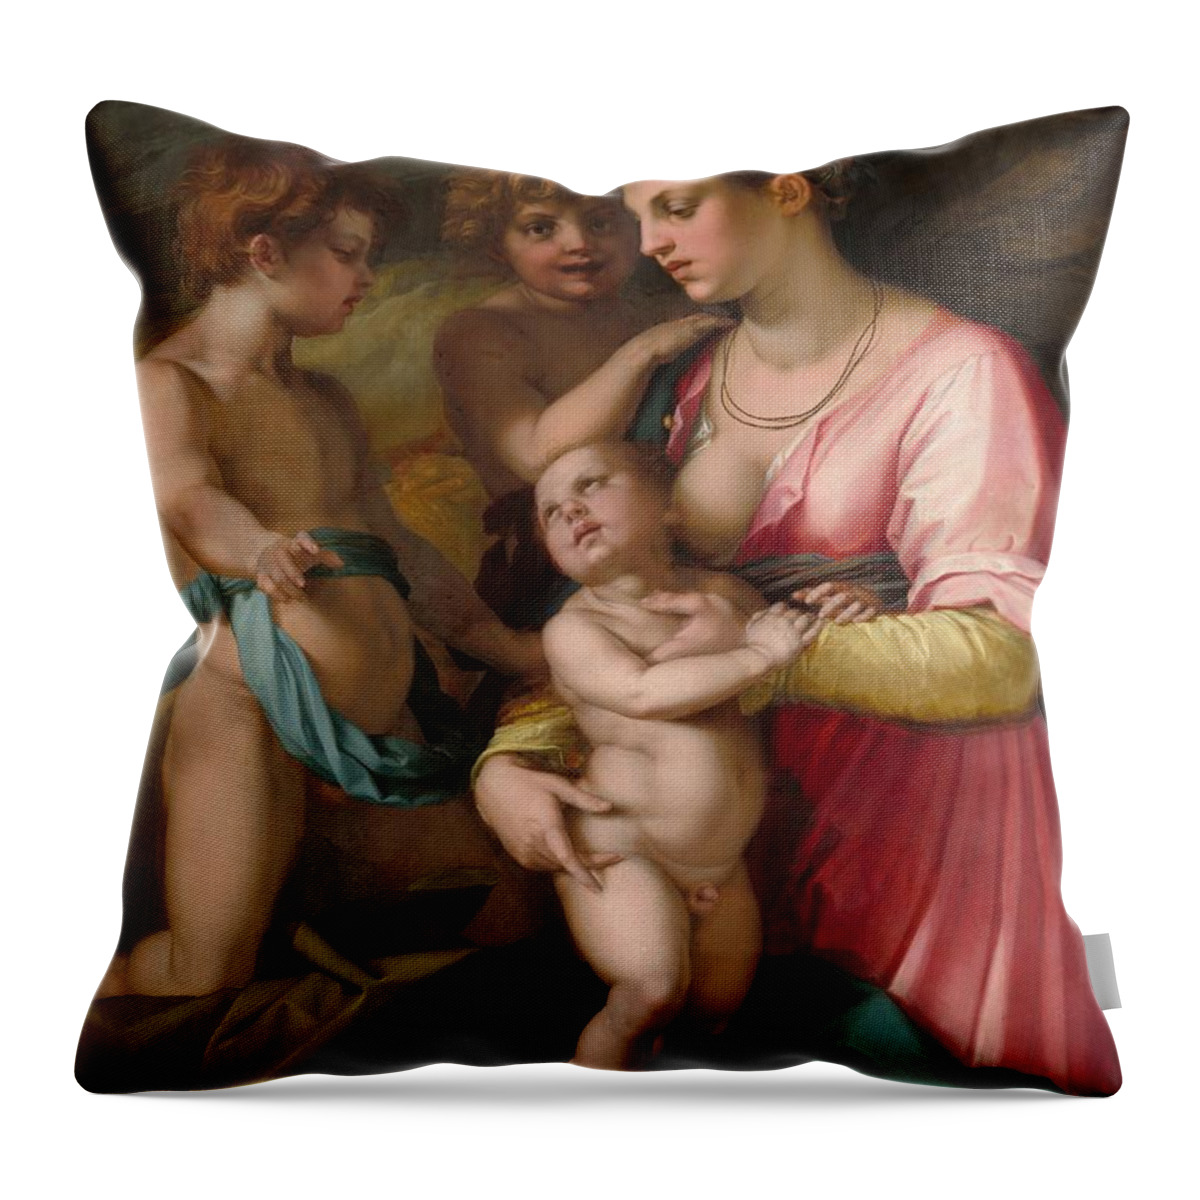 1530 Throw Pillow featuring the painting Charity by Andrea del Sarto